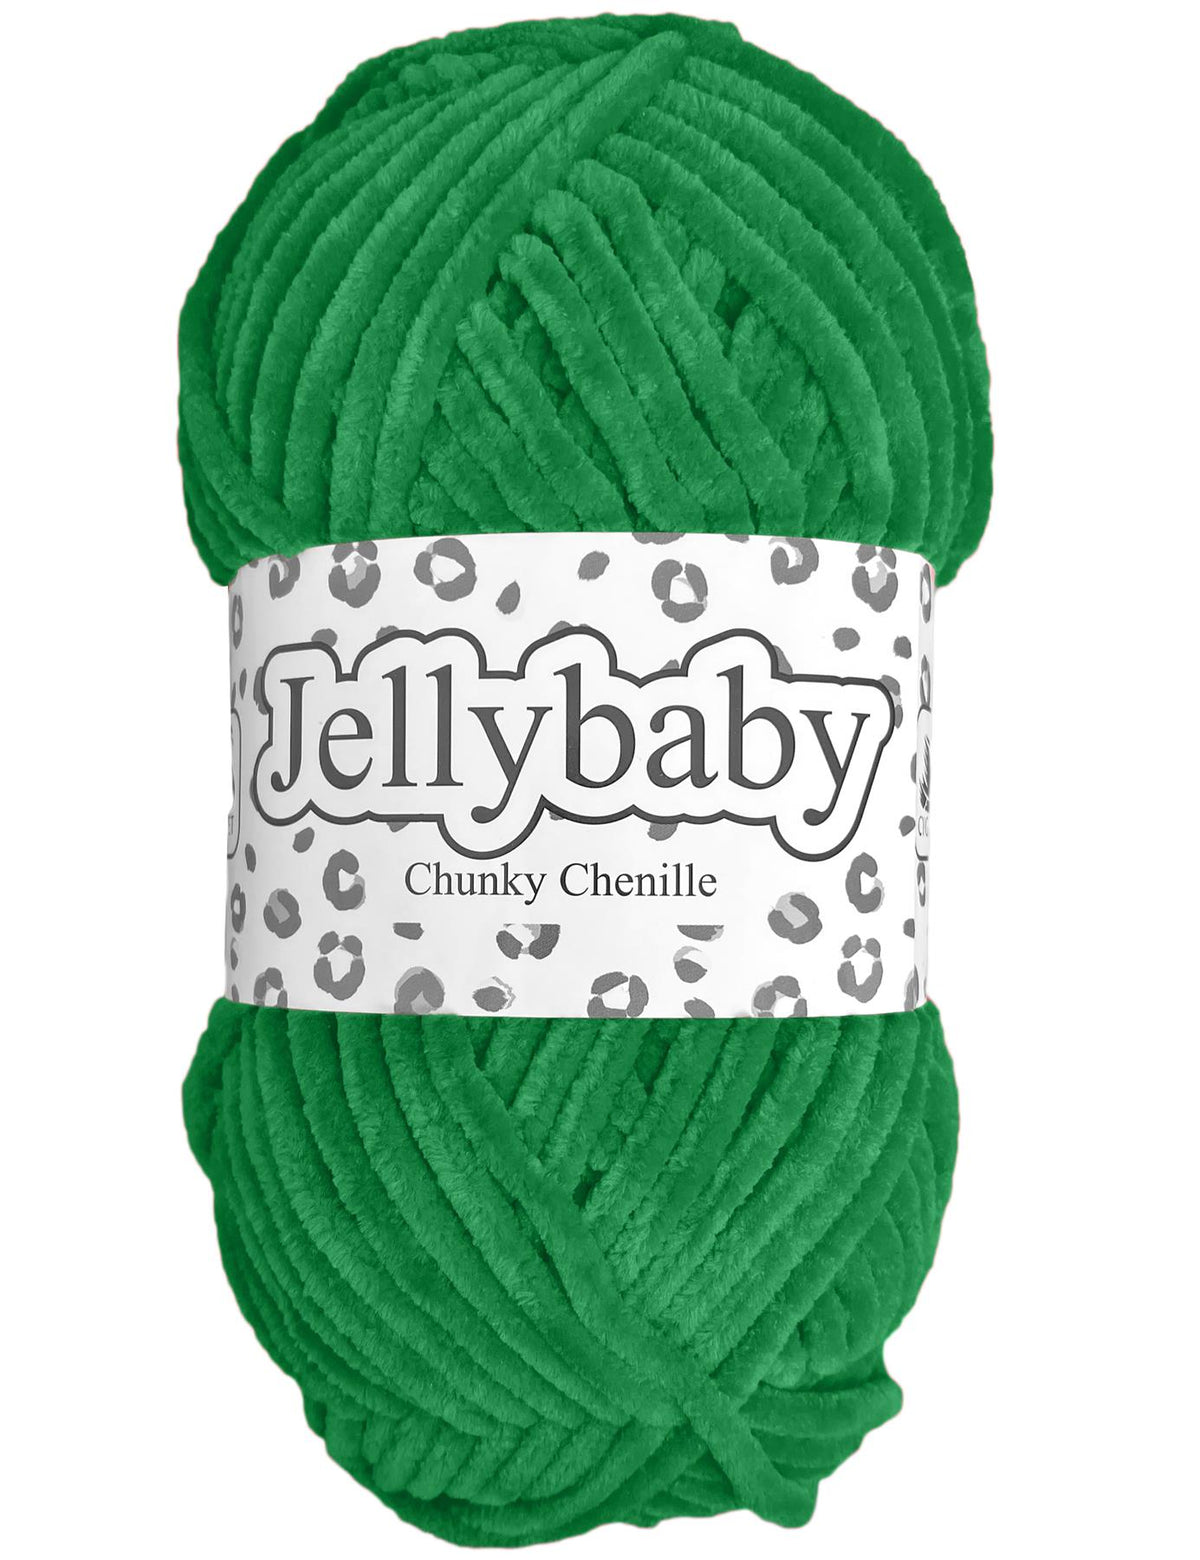 Cygnet Jellybaby Chenille Chunky Forest Green (011) -100g